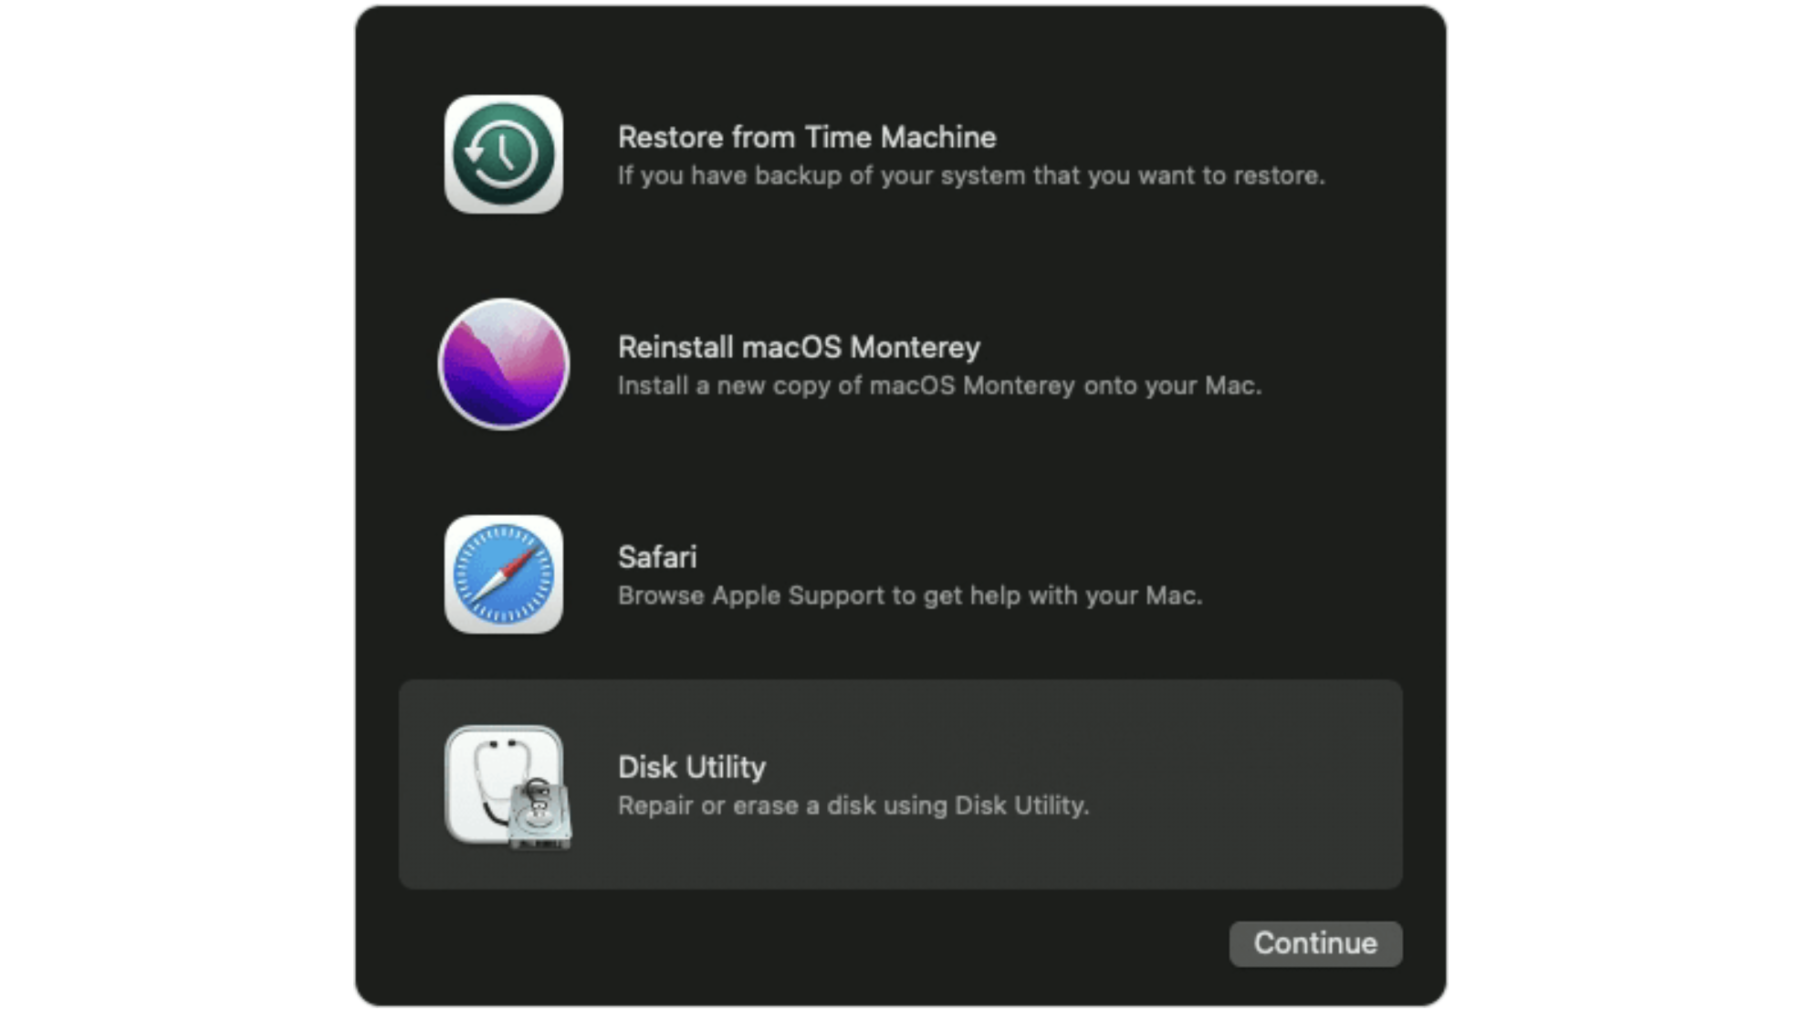 Boot your Mac into recovery mode